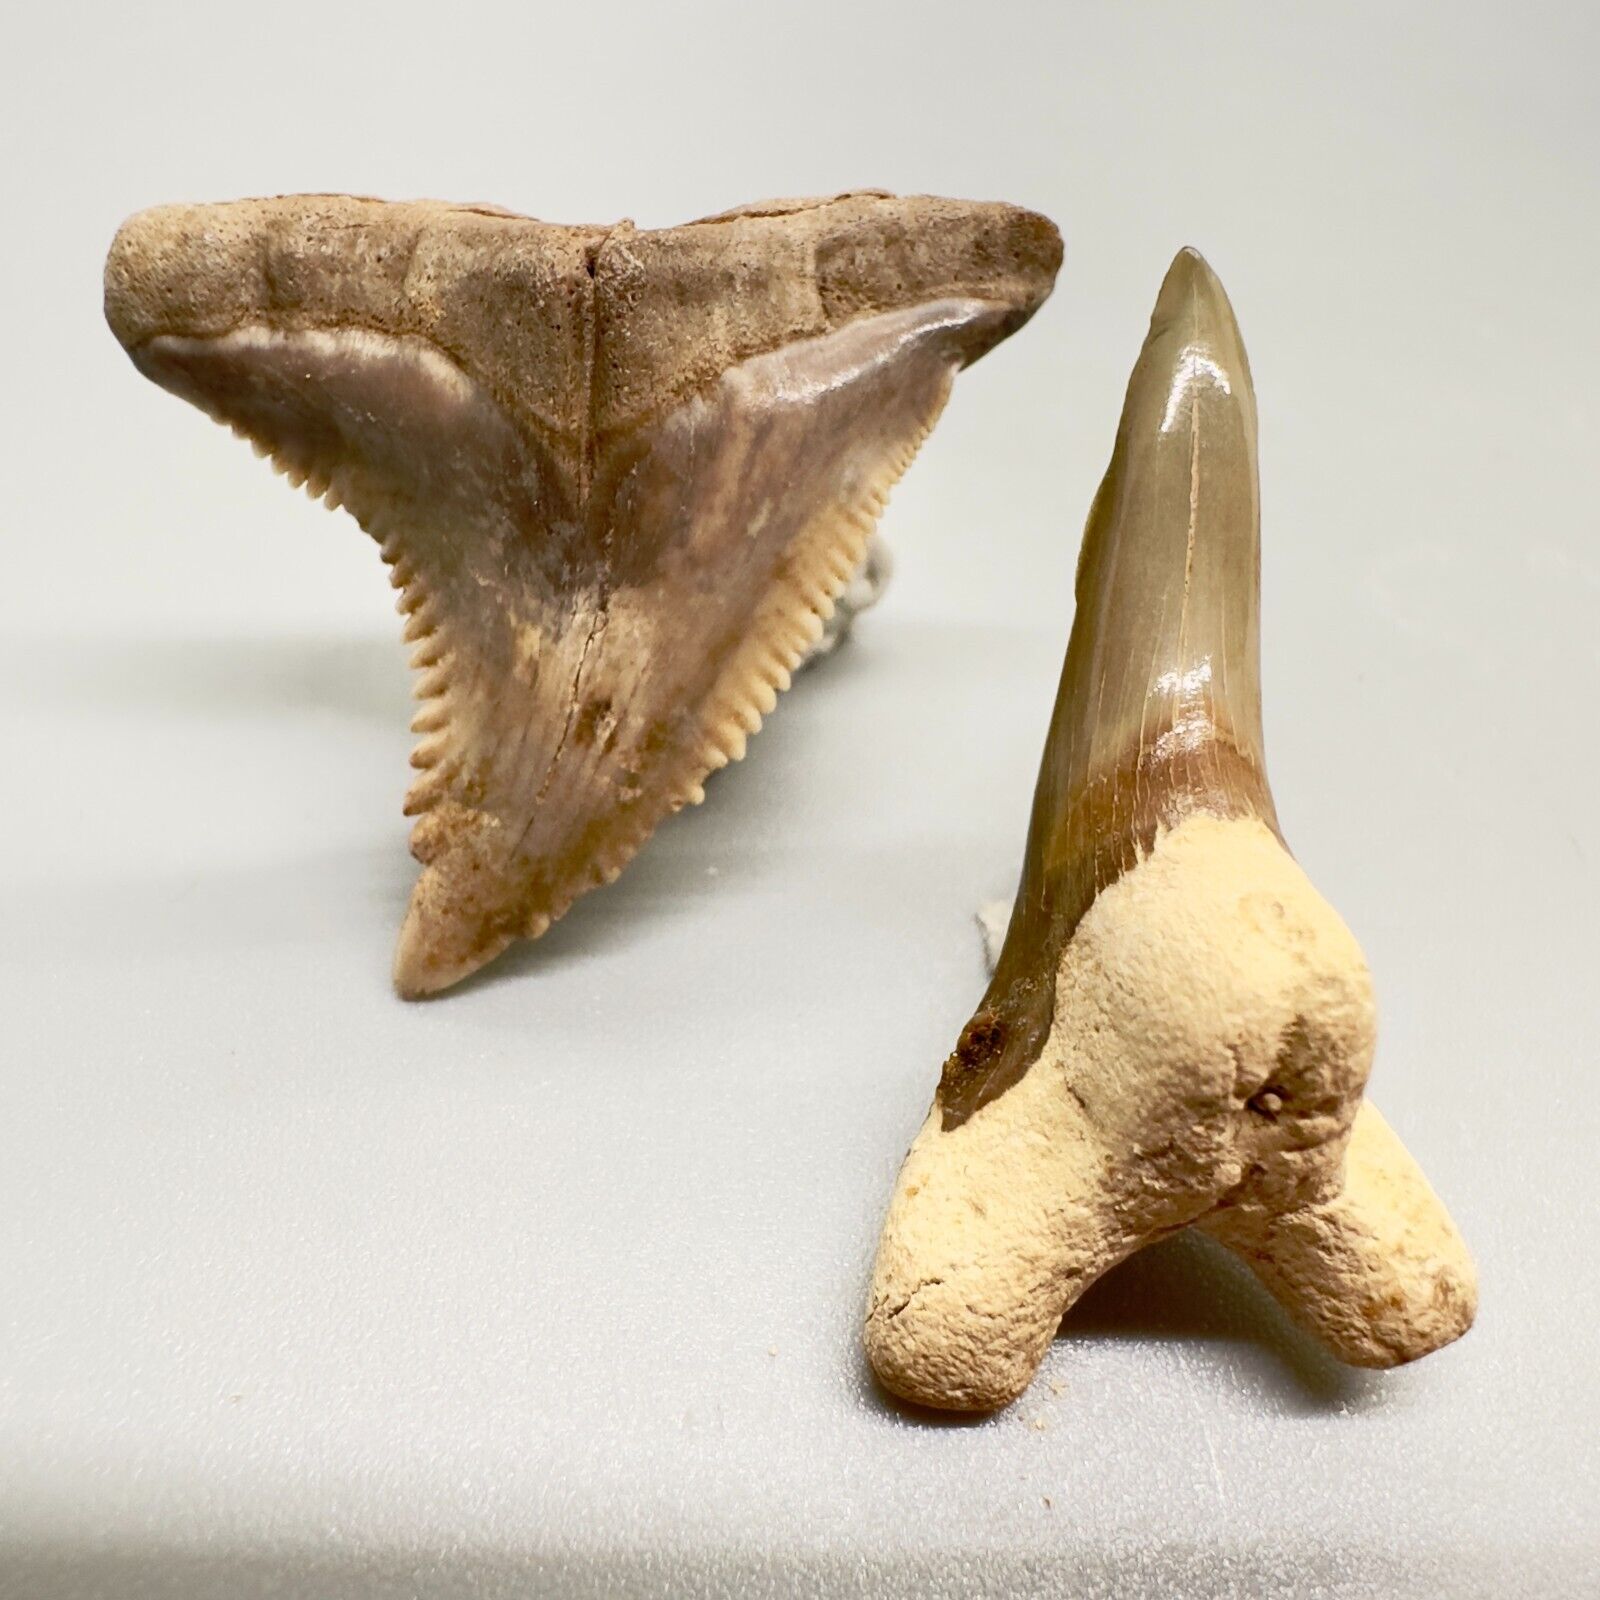 Pair Upper/Lower Colorful Fossil EXTINCT SNAGGLETOOTH Teeth - Gainesville, FL